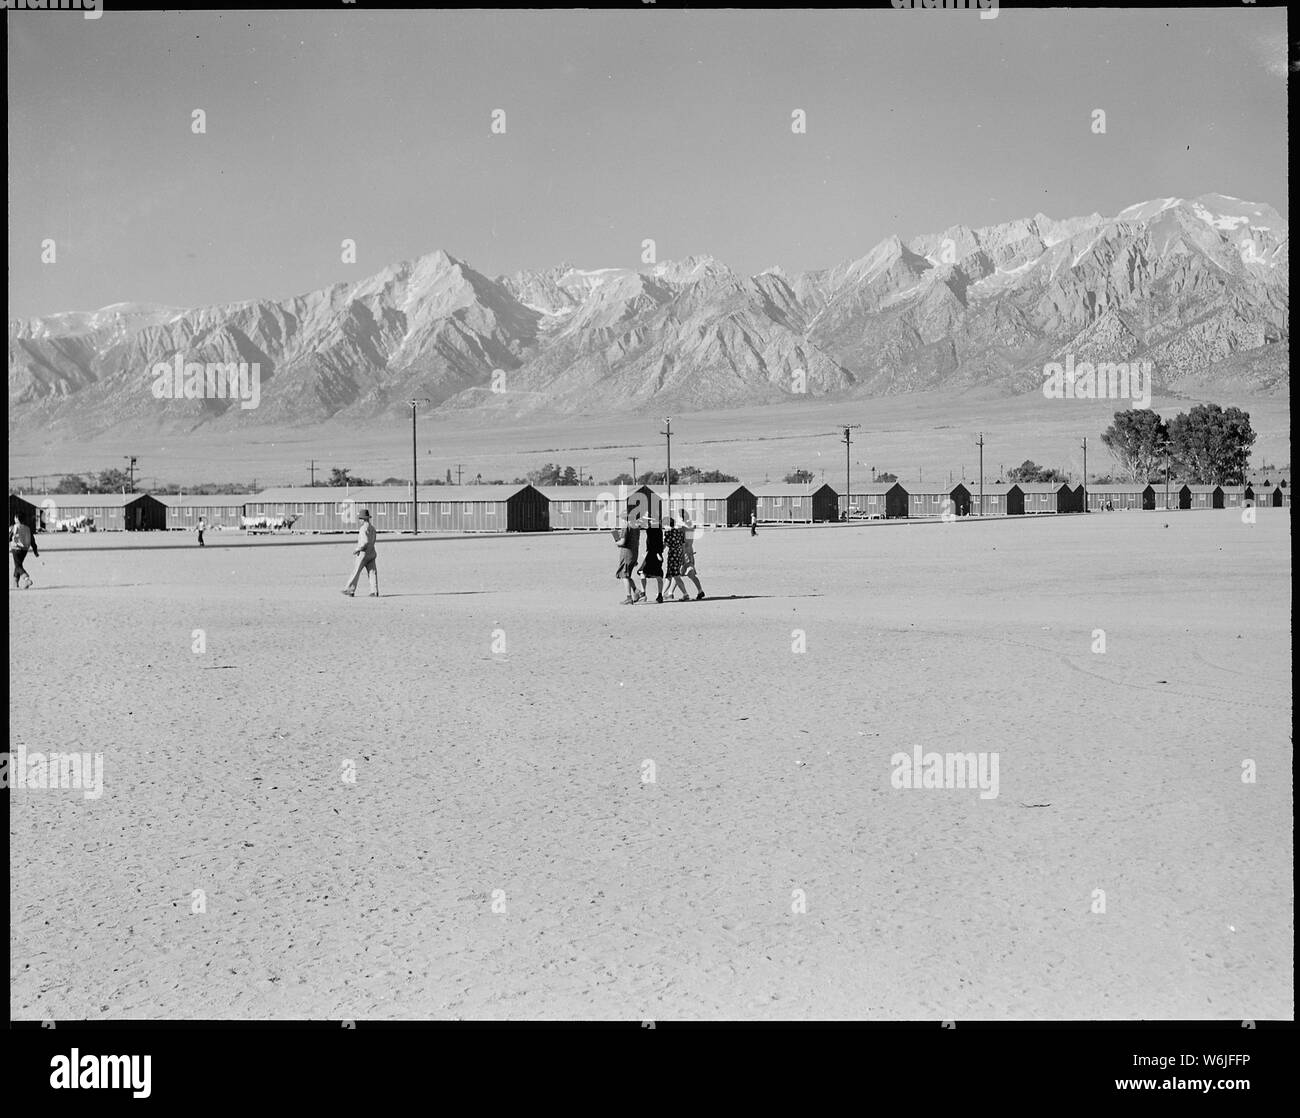 Manzanar Relocation Center, Manzanar, California. This War Relocation Authority center which houses . . .; Scope and content:  The full caption for this photograph reads: Manzanar Relocation Center, Manzanar, California. This War Relocation Authority center which houses 10,00 evacuees of Japanese ancestry is located in Owens Valley between the High Sierras and Mount Whitney, the highest peak in the United States. The space in the forground is a wide fire-break between blocks of barracks which aslo serves as a playfield. Stock Photo